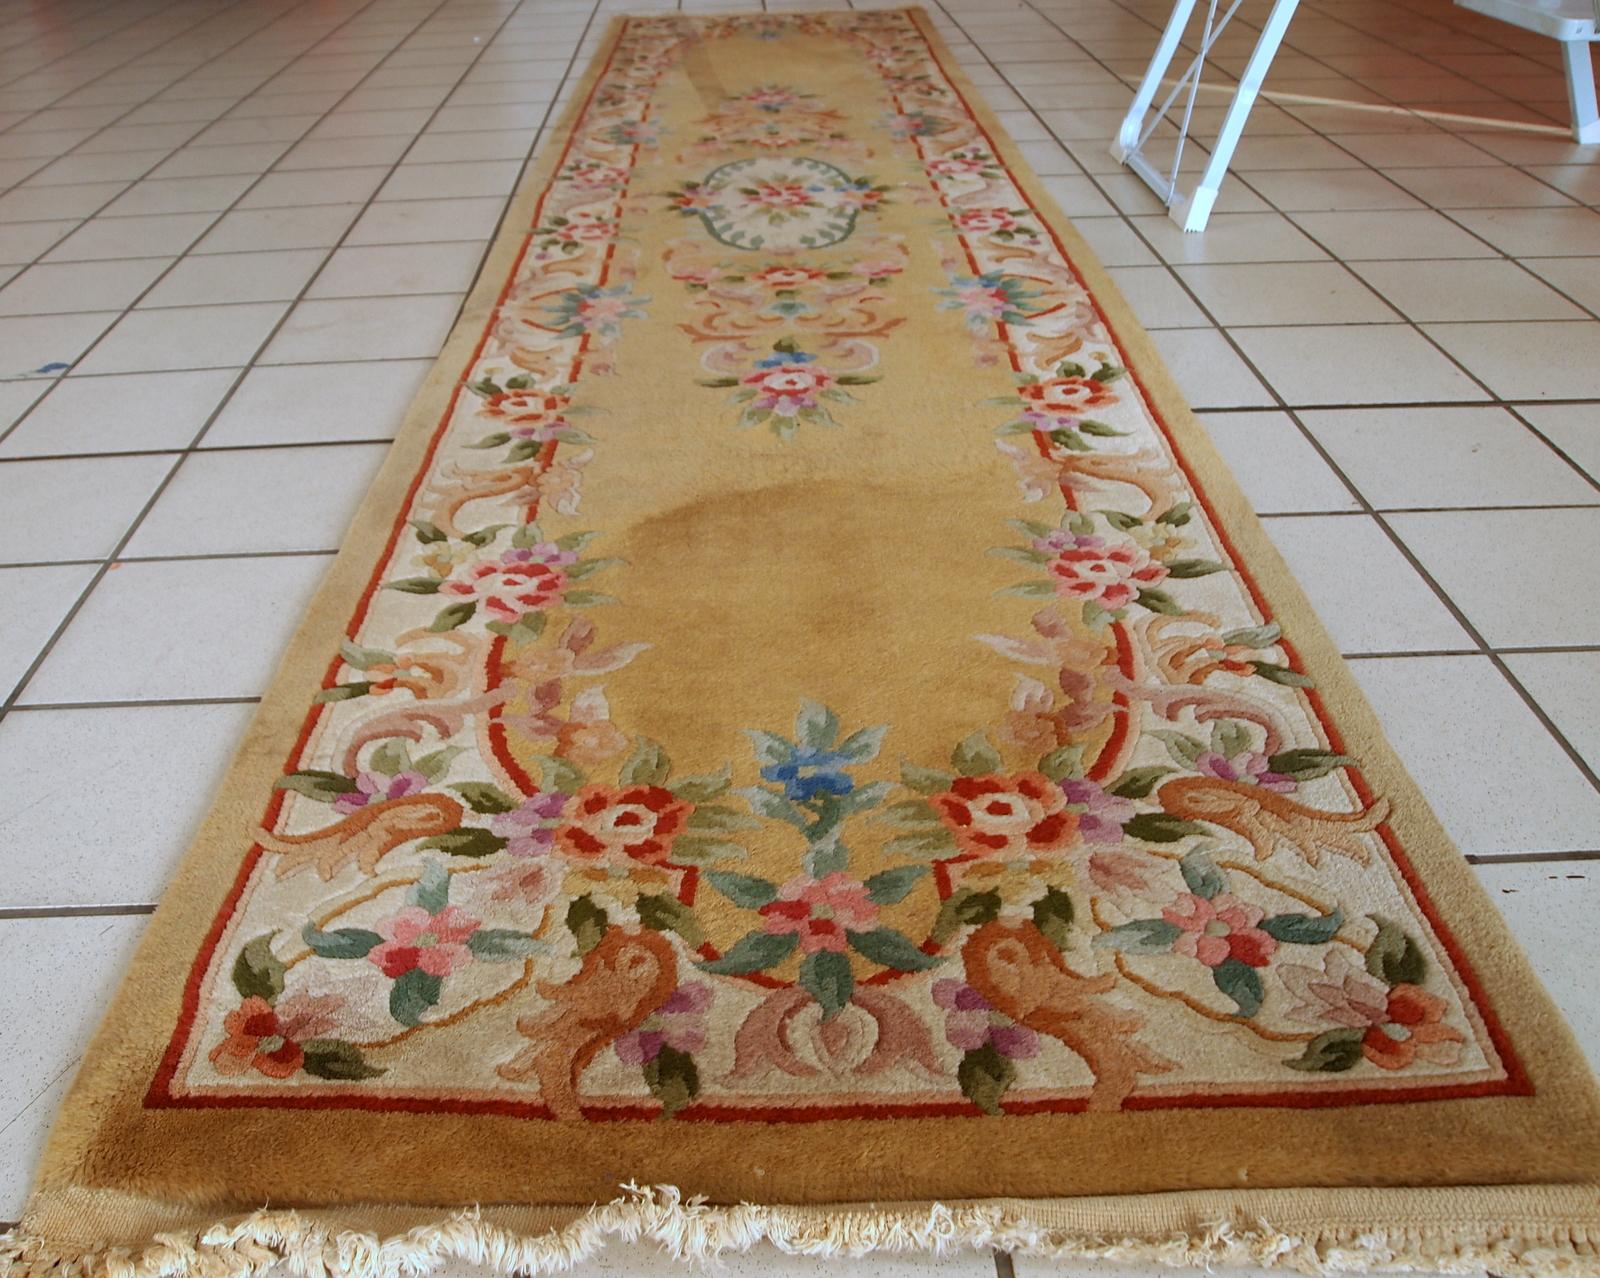 Vintage runner from China made in yellow wool. The rug is from the end of 20th century in original good condition.

- Condition: Original good,

- circa 1970s,

- Size: 2.3' x 9.9' (70 cm x 303 cm),

- Material: Wool,

- Country of origin: